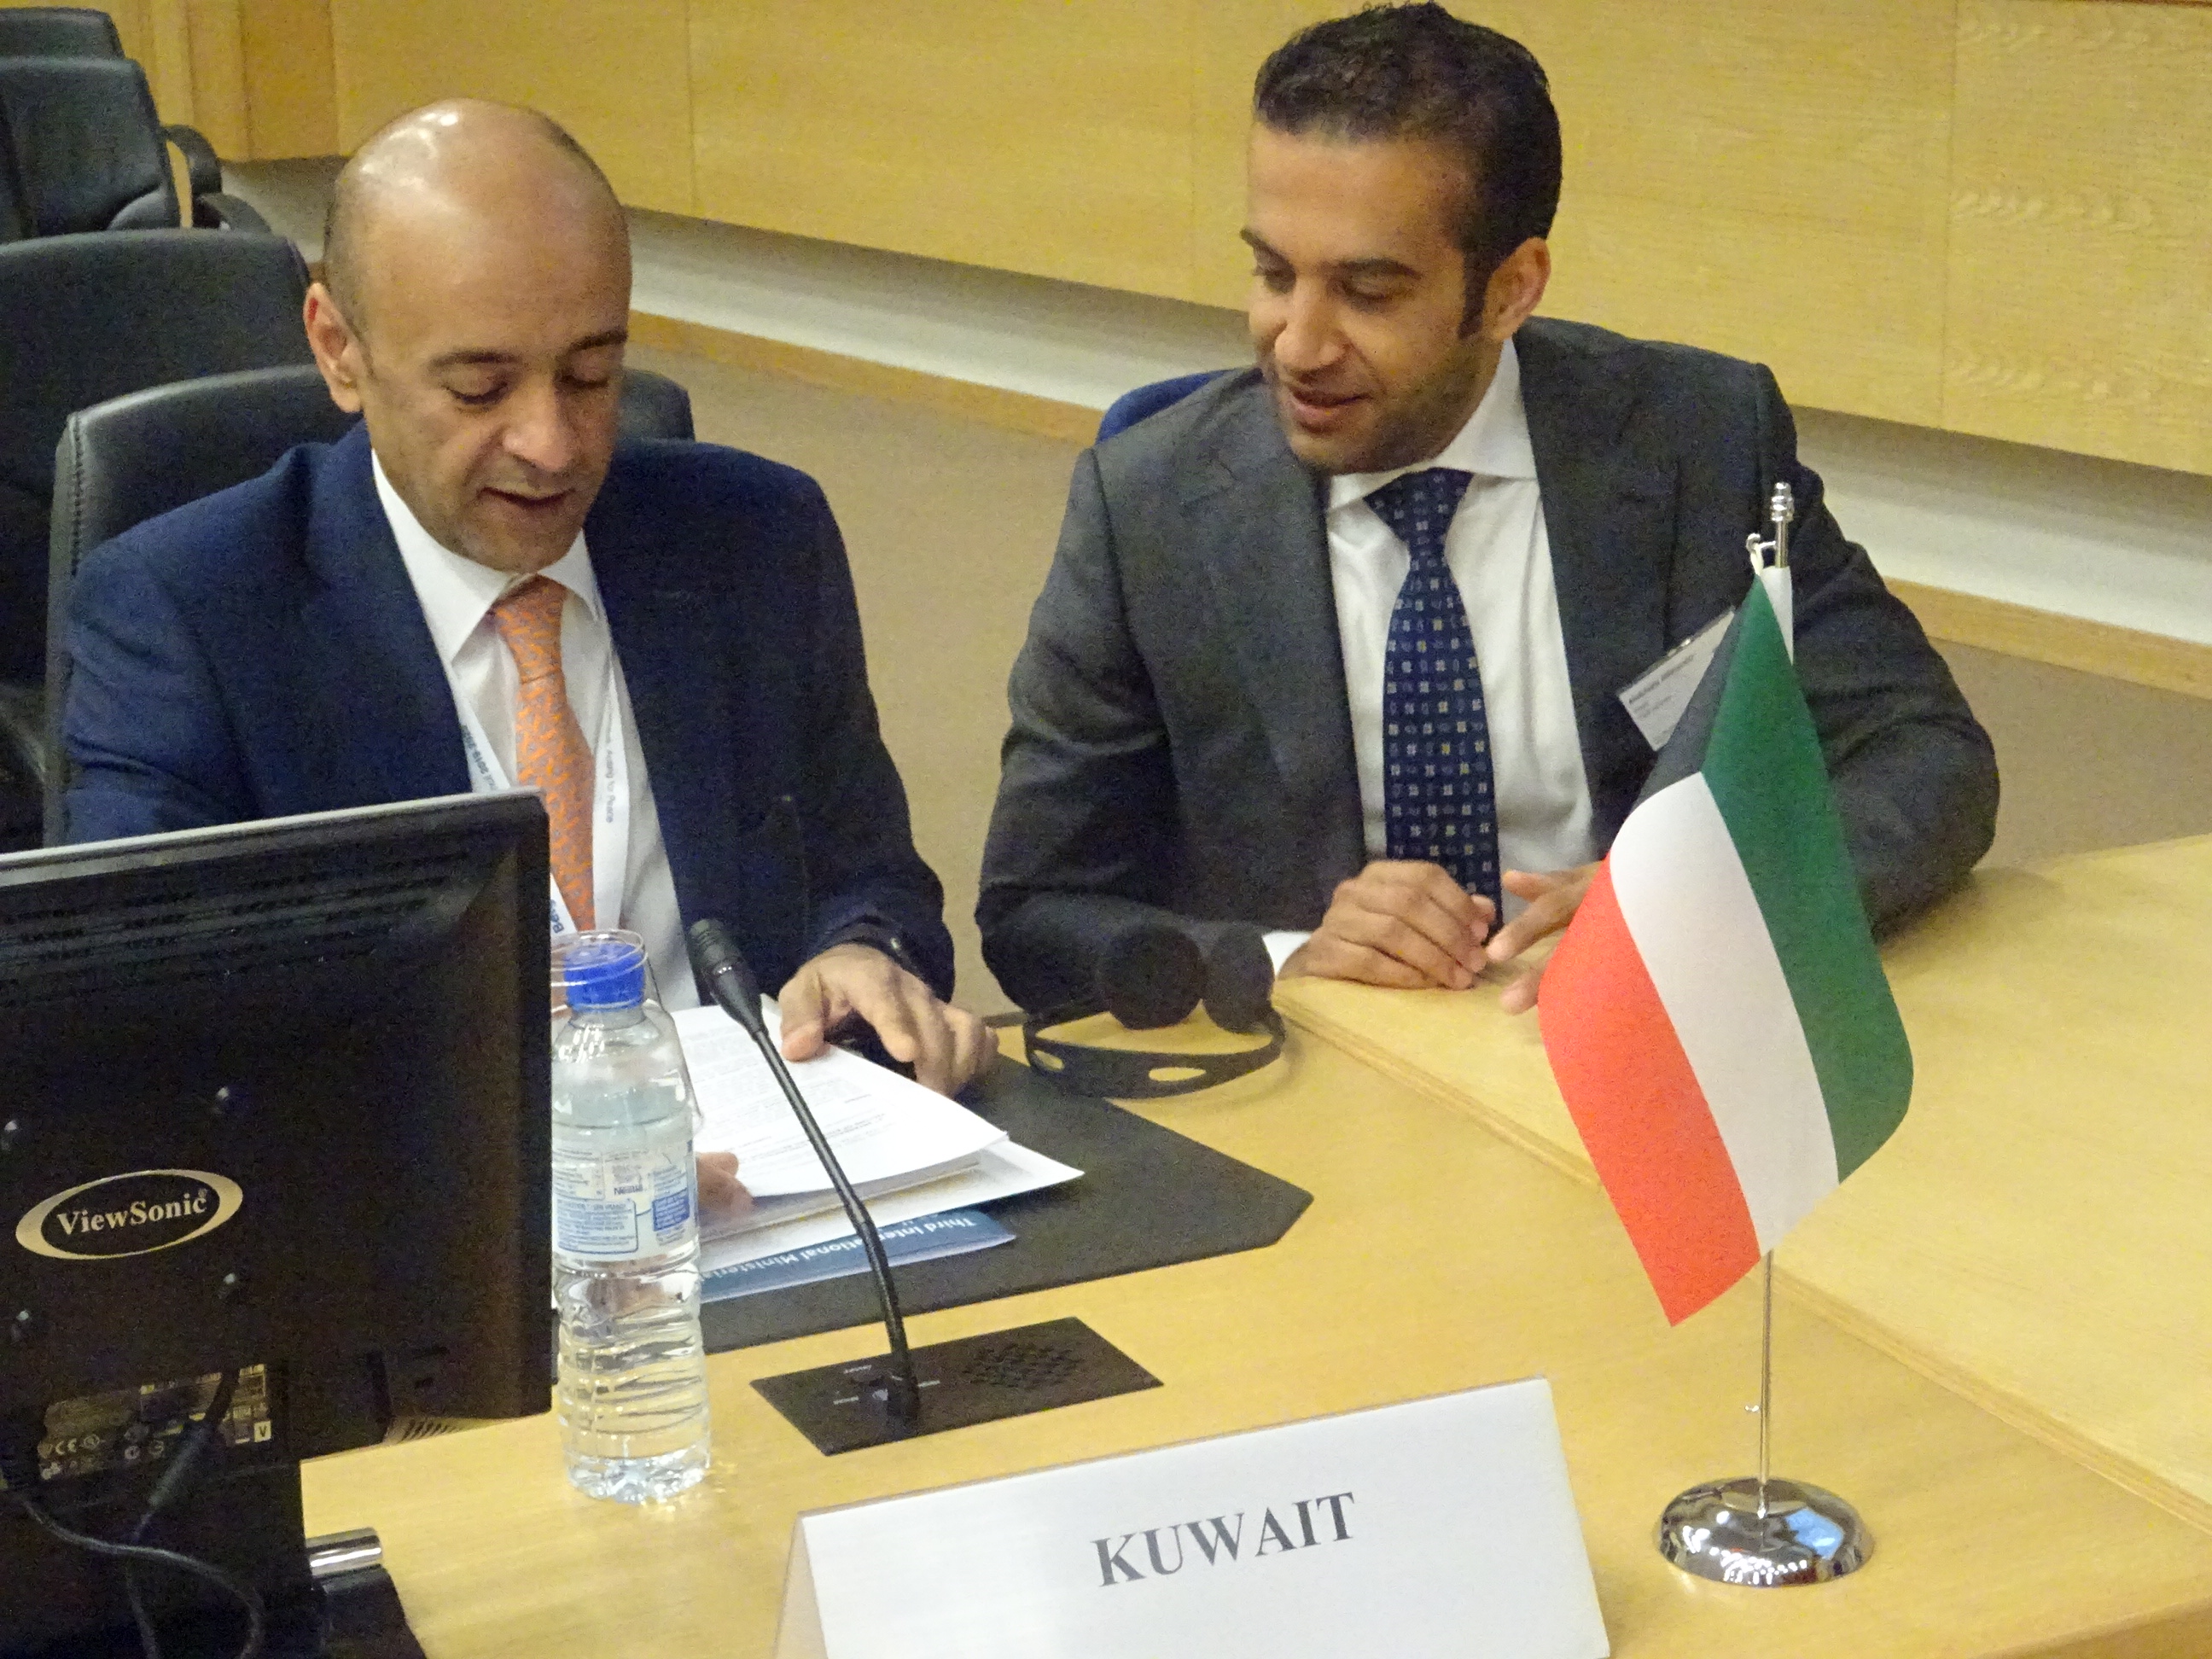 Kuwait ambassador Jasem Al Budaiwi  at the Third International Conference on the victims of ethnic and religious violence in the Middle East in Brussels